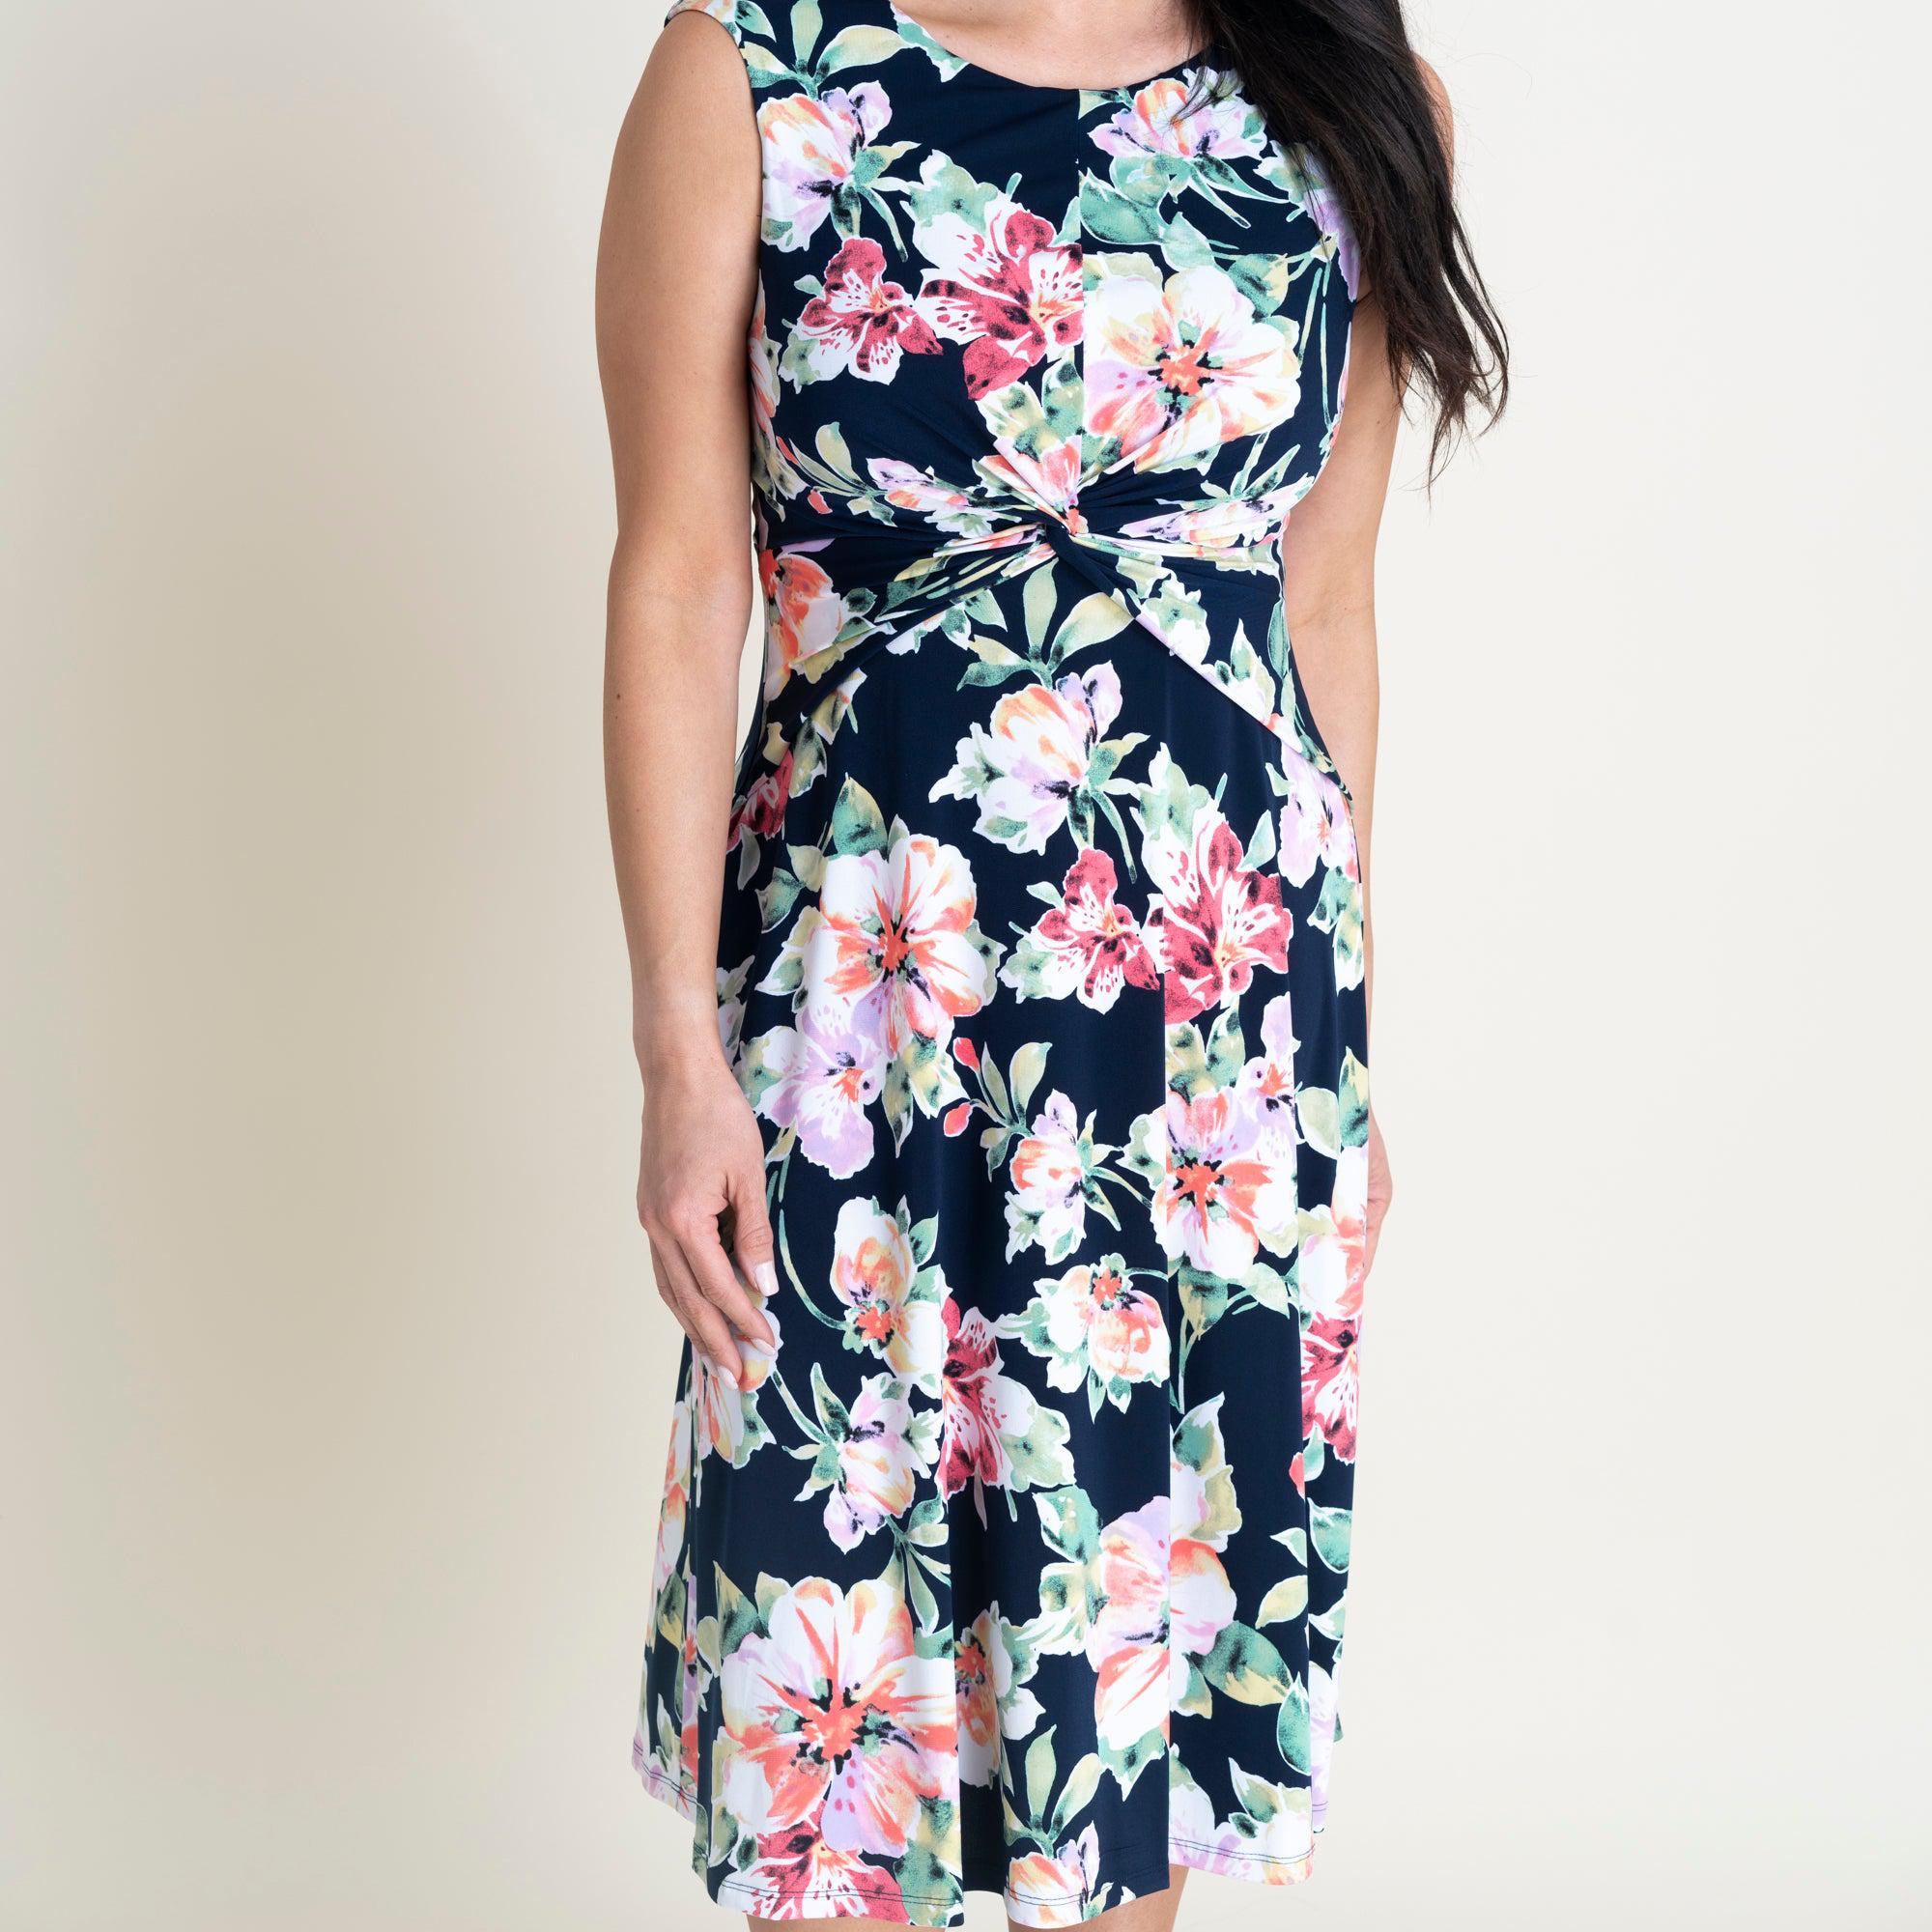 Woman posing wearing Navy Callie Knotted Fit and Flare Dress from Connected Apparel